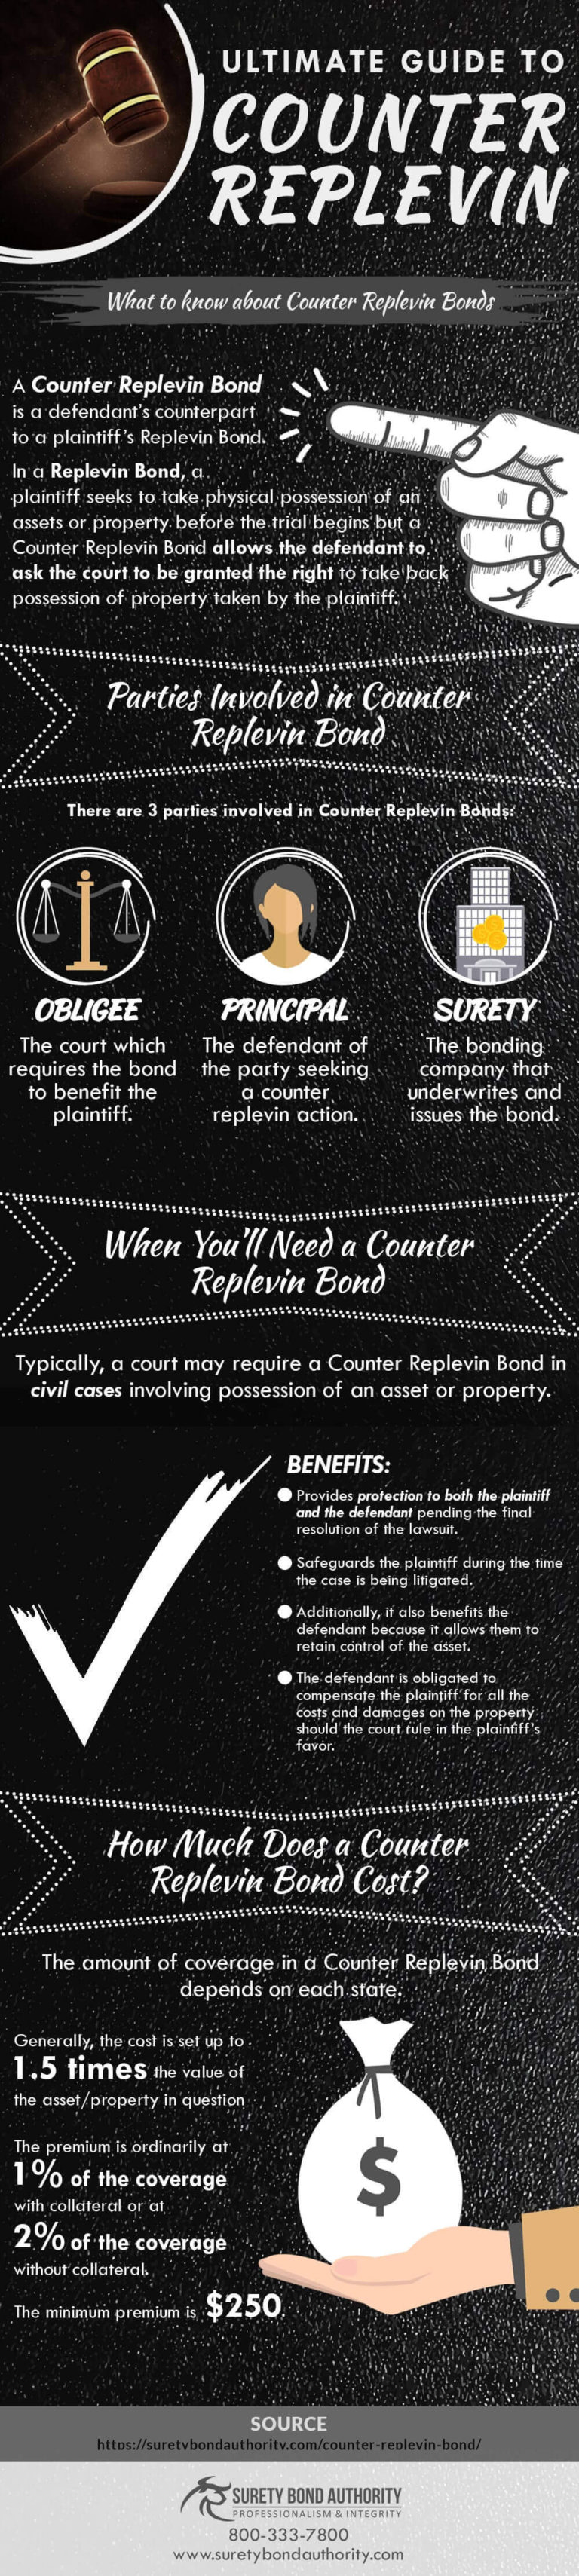 Counter Replevin Bonds Infographic